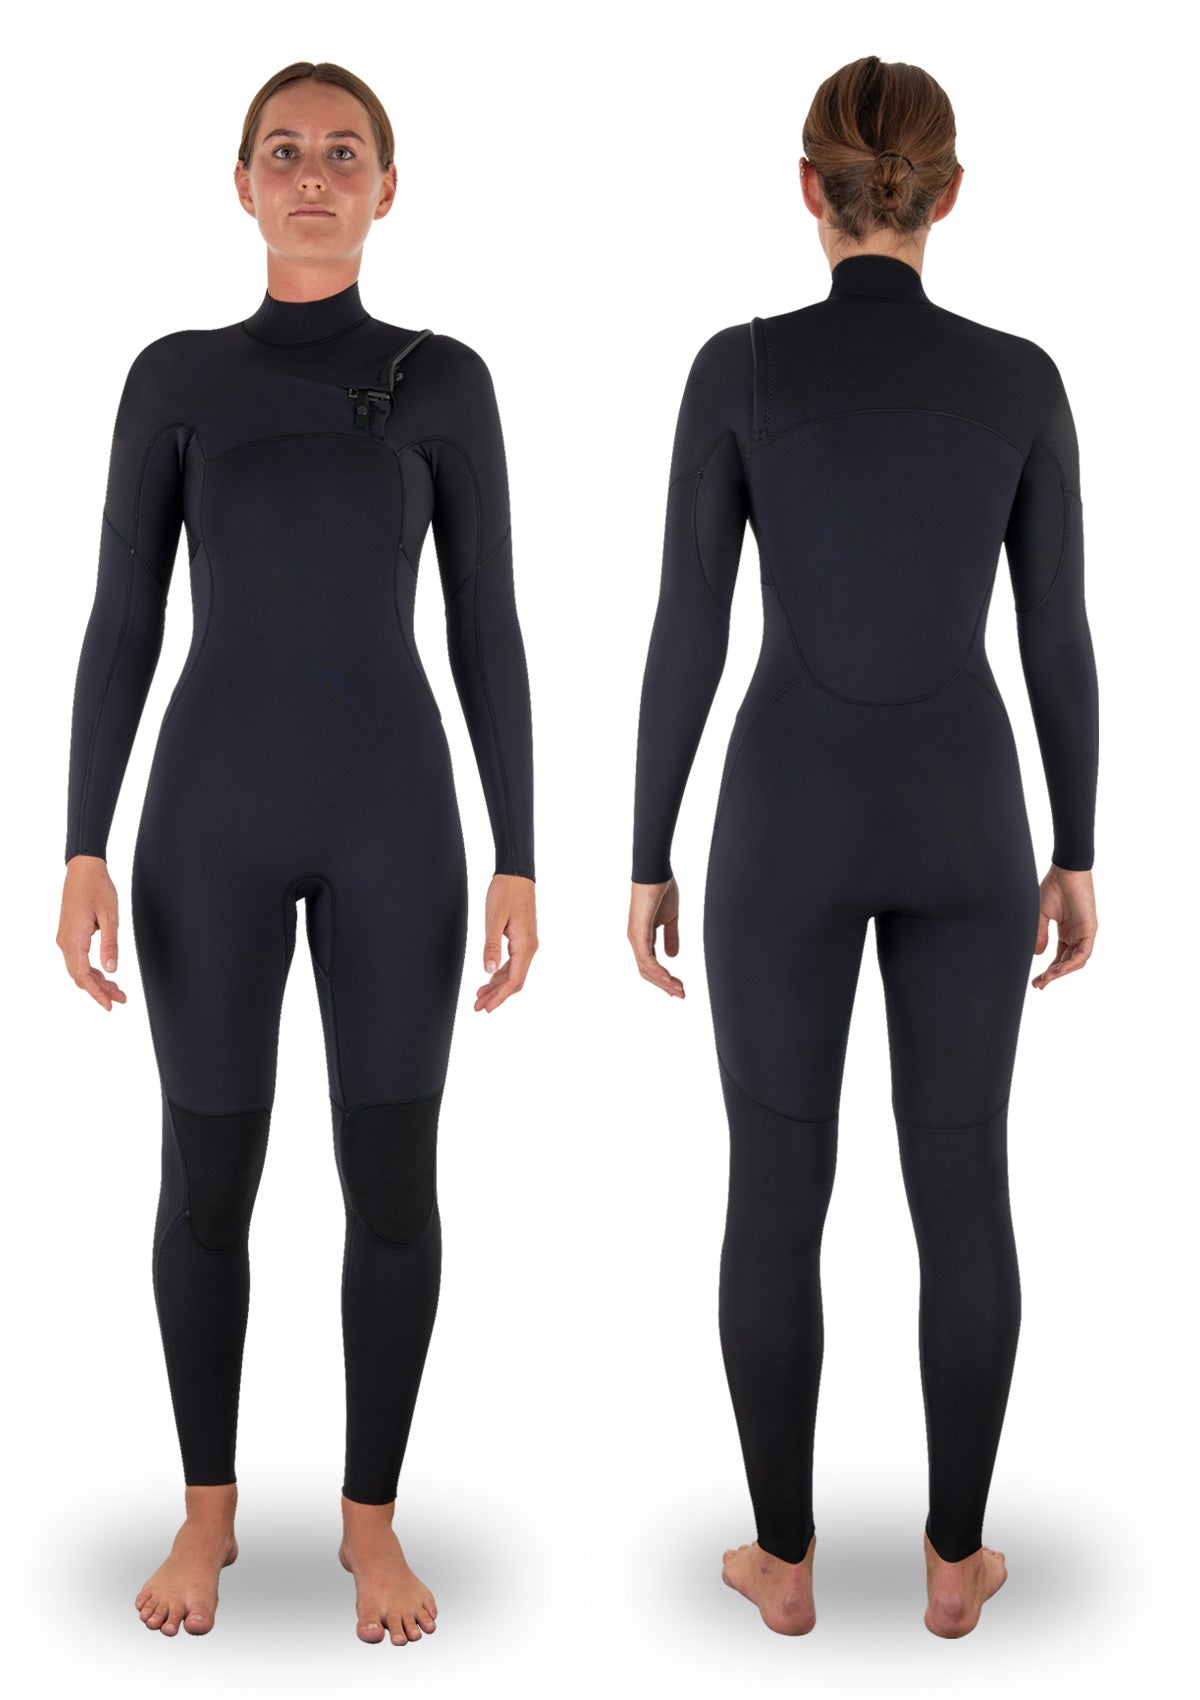 needessentials womens 3/2 chest zip thermal winter wetsuit surfing black non branded